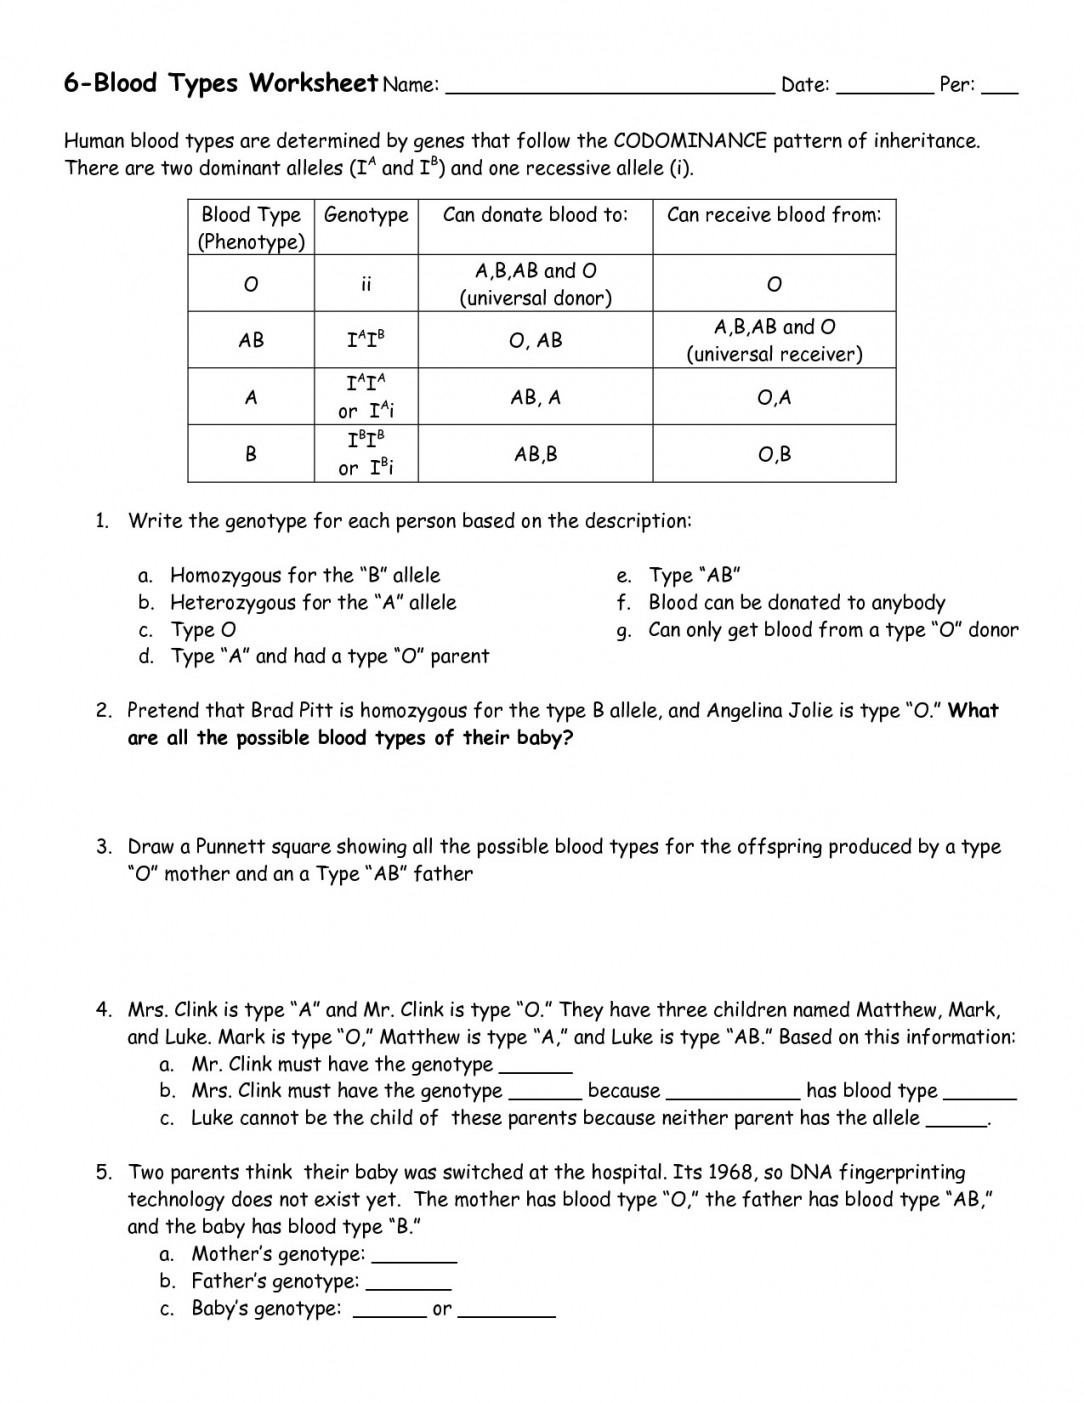 multiple-alleles-blood-type-worksheet-answers